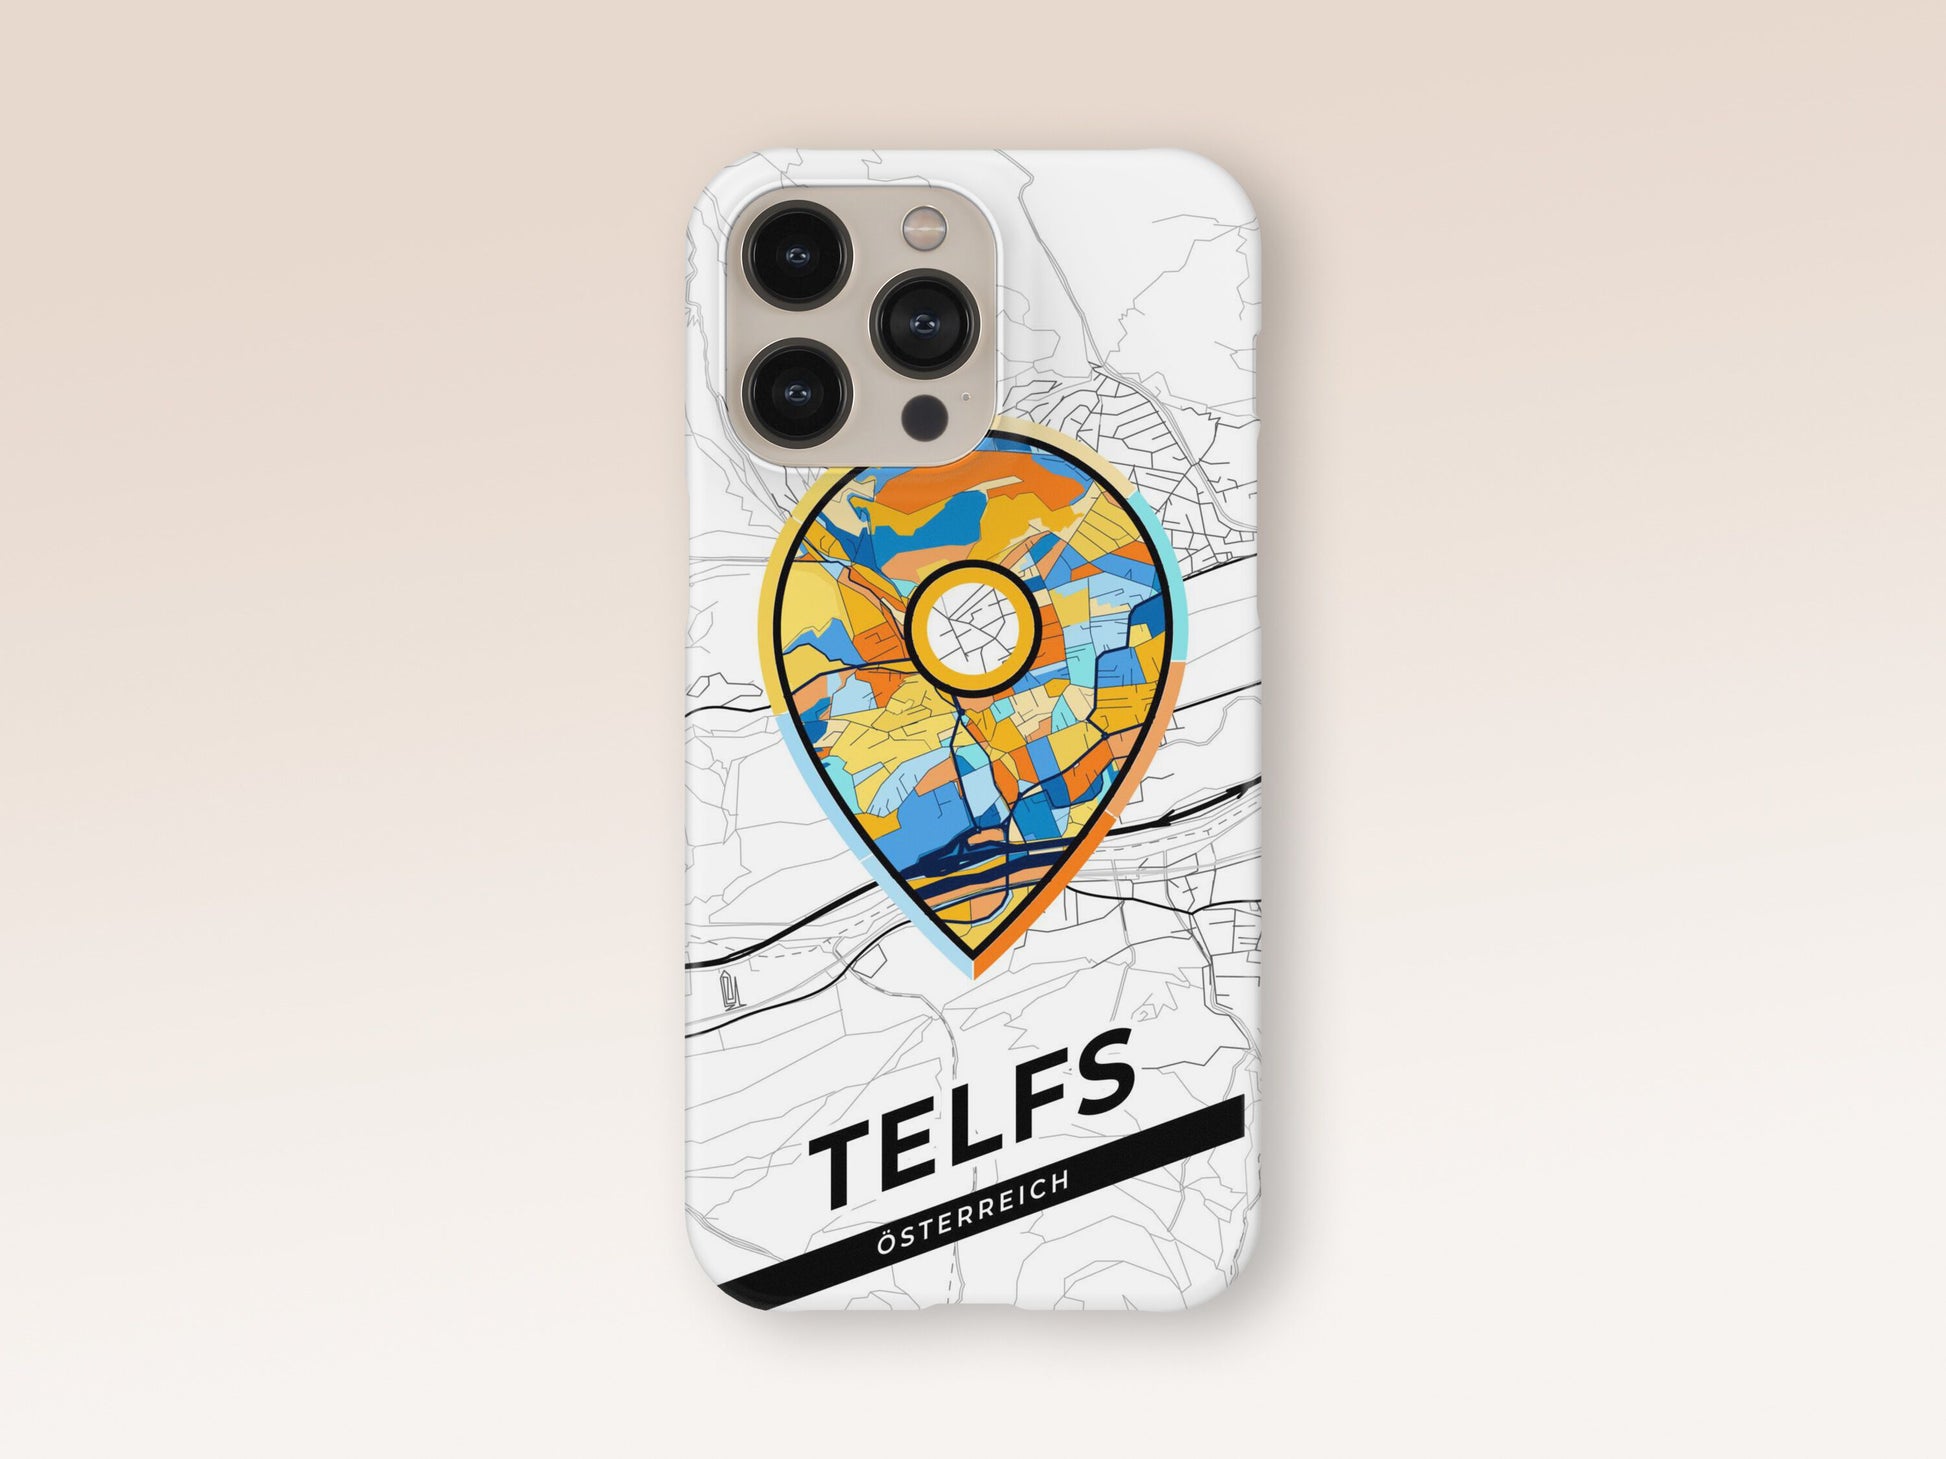 Telfs Österreich slim phone case with colorful icon. Birthday, wedding or housewarming gift. Couple match cases. 1